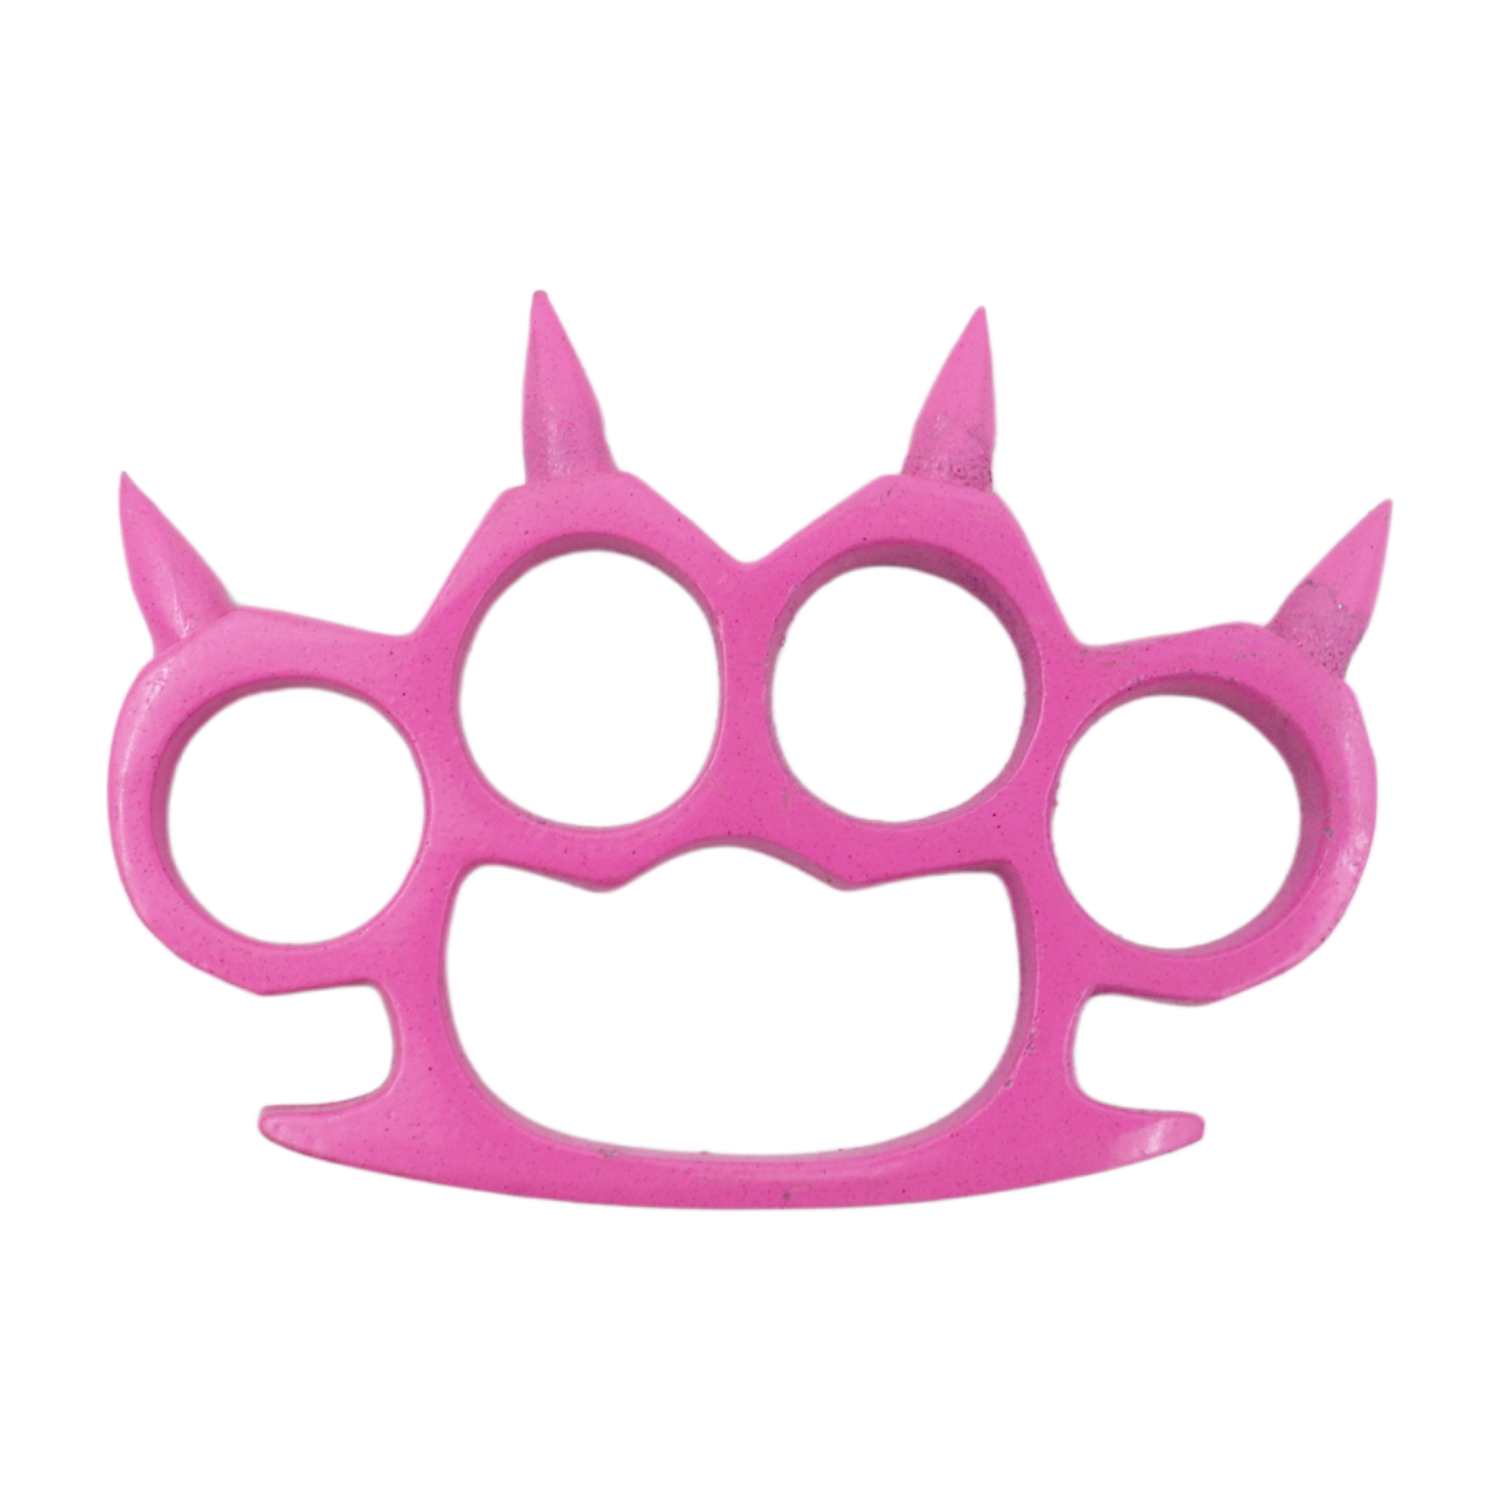 https://cdn.shopify.com/s/files/1/1721/5605/products/pinkspikeknuckles.png?v=1648486152